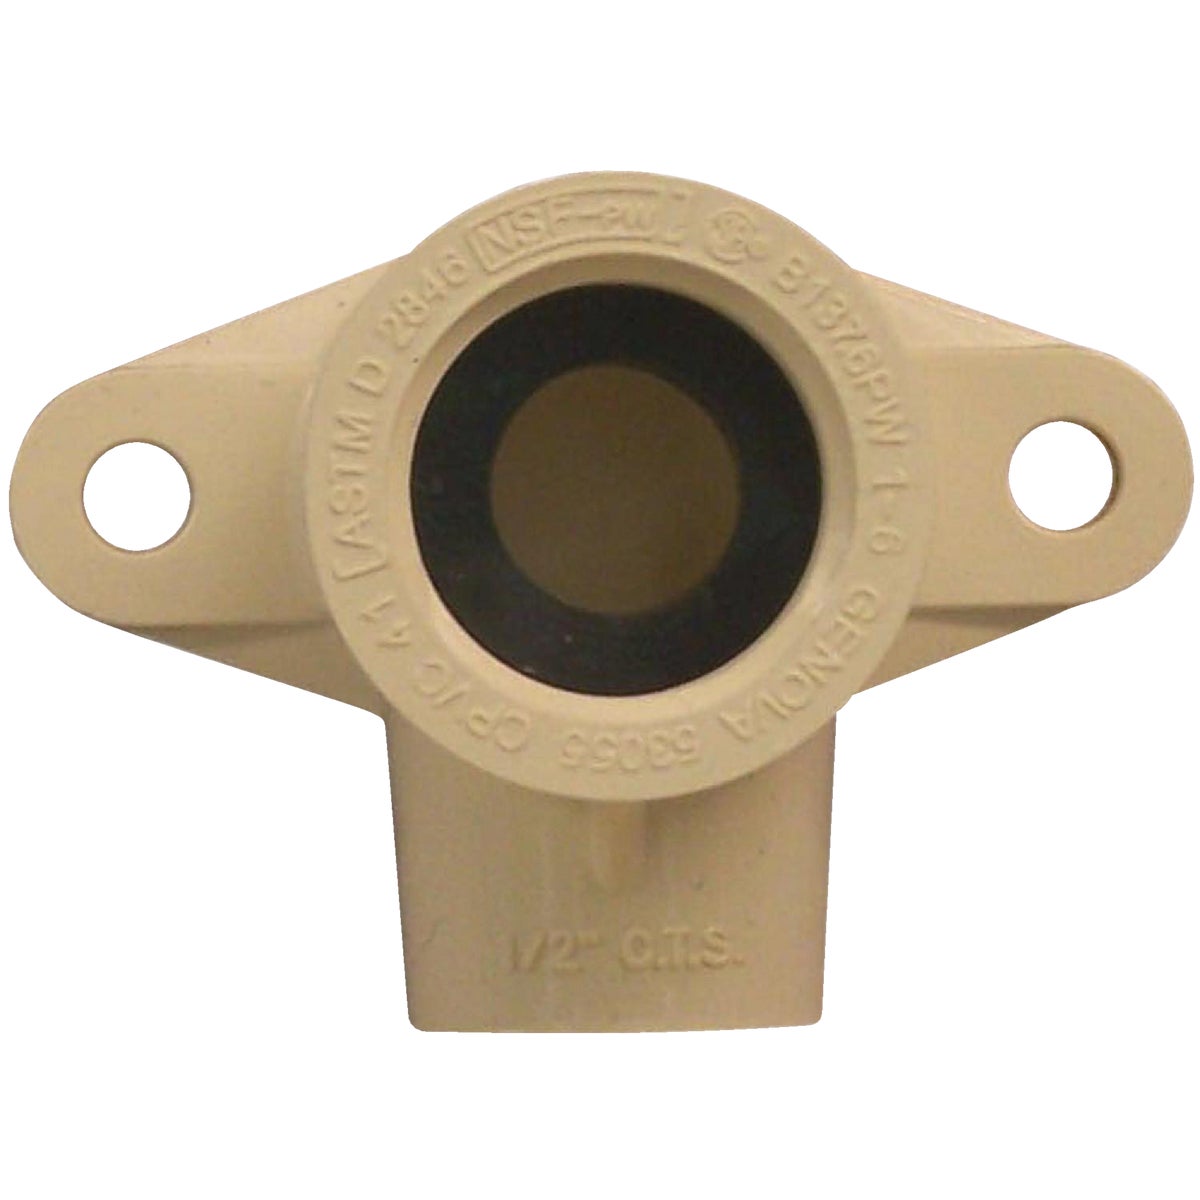 Item 404912, Adapts from 1/2" CPVC to 1/2" Female pipe thread and features lugs for 